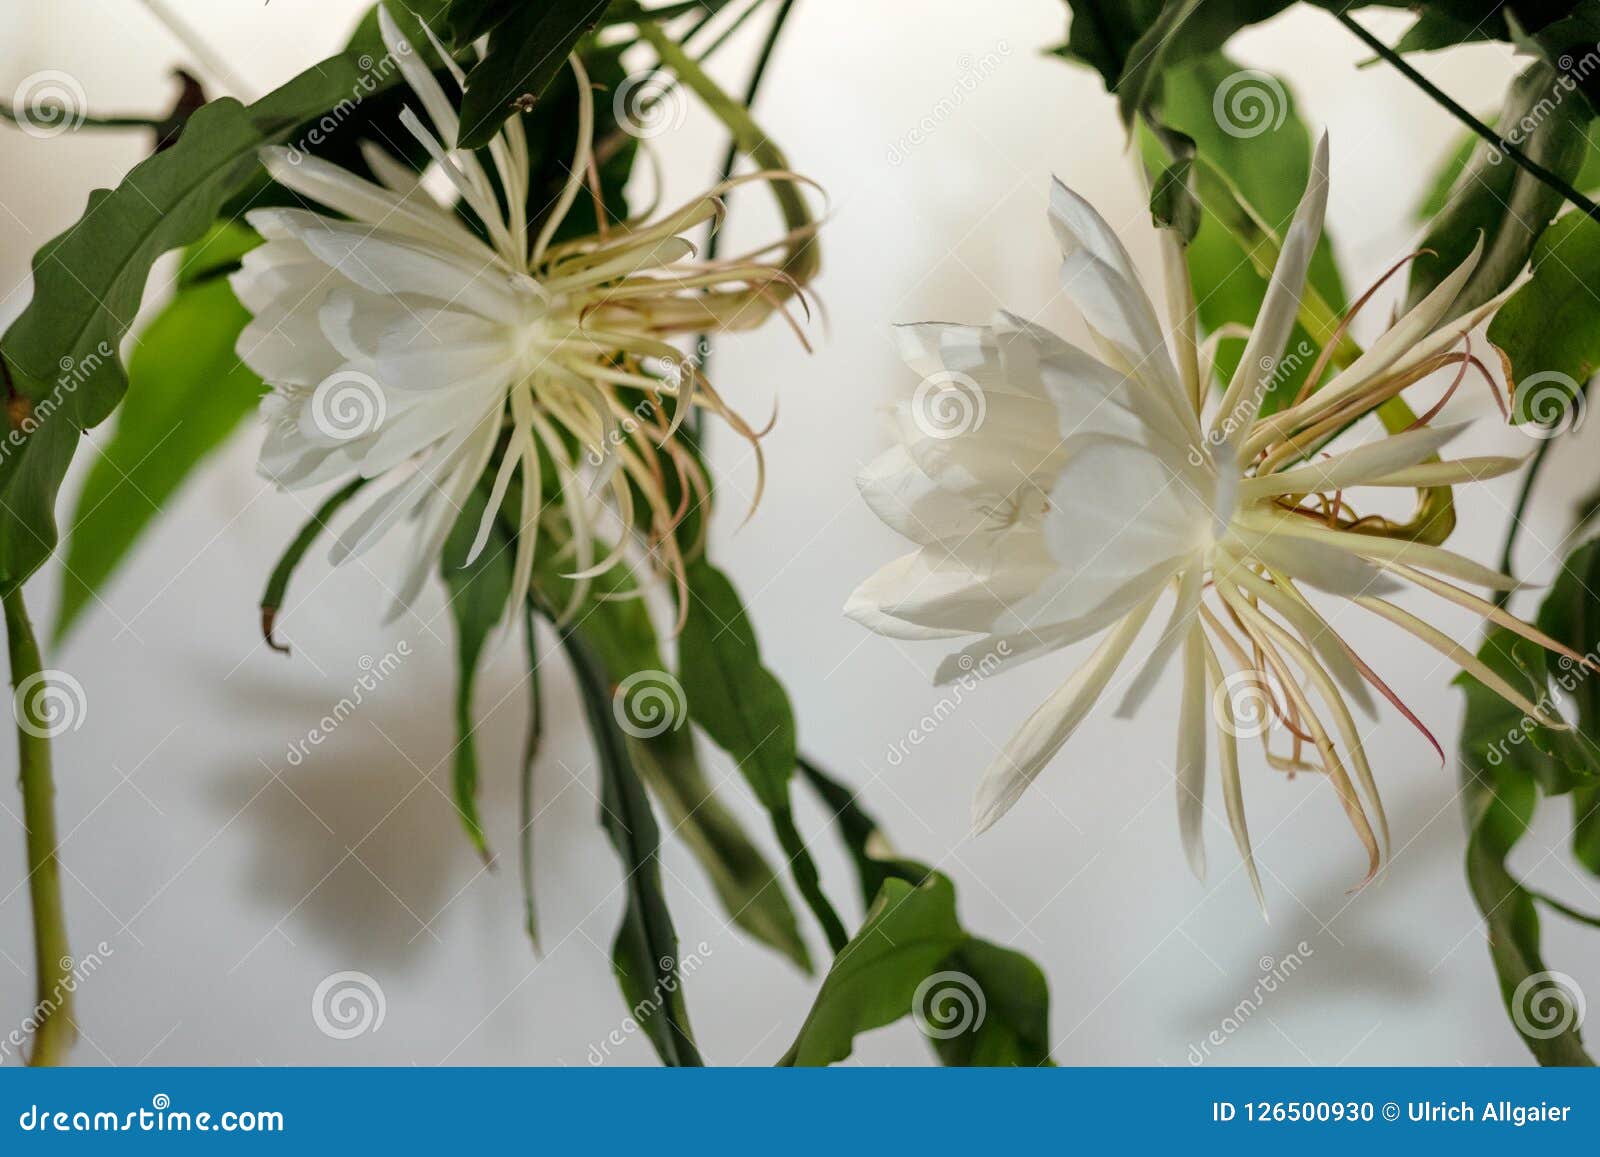 the queen of the night; dama de noche; epiphyllum oxypetalum species of cactus, plant produces night-blooming, fragrant,